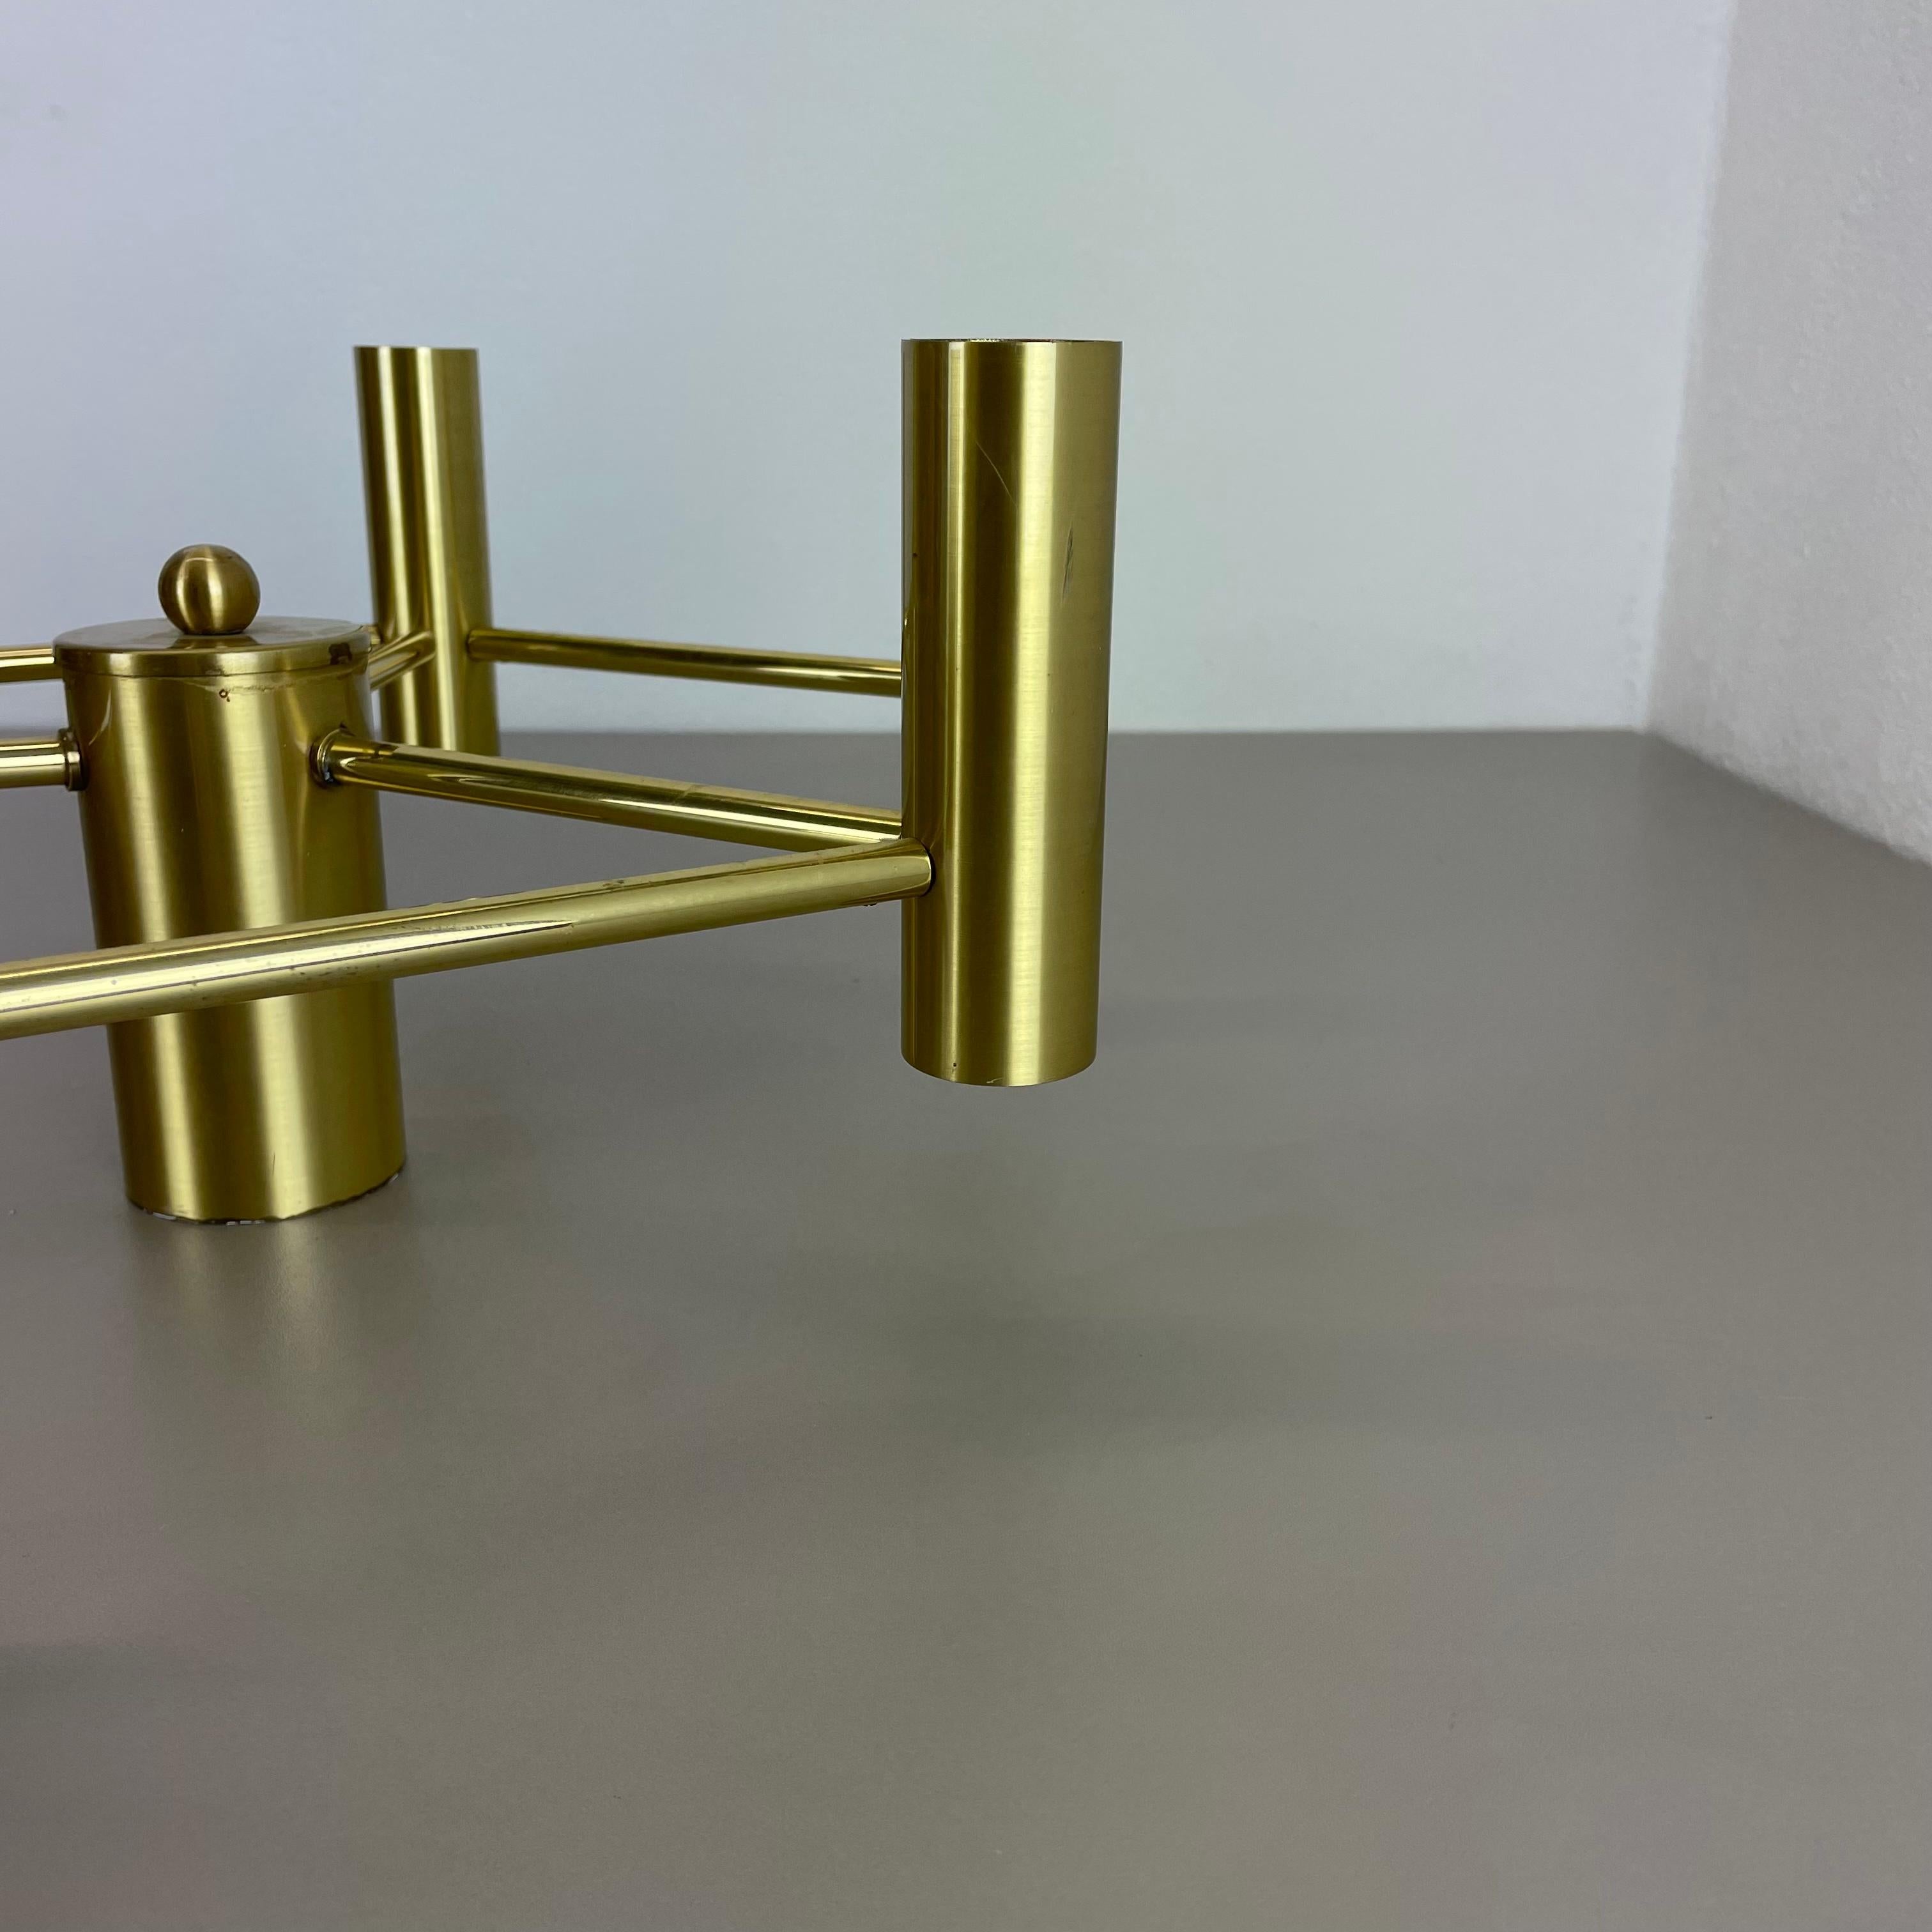 Brass Italian Stilnovo Style Atomic Space Age Ceiling Light Sconces, Italy, 1970 For Sale 4